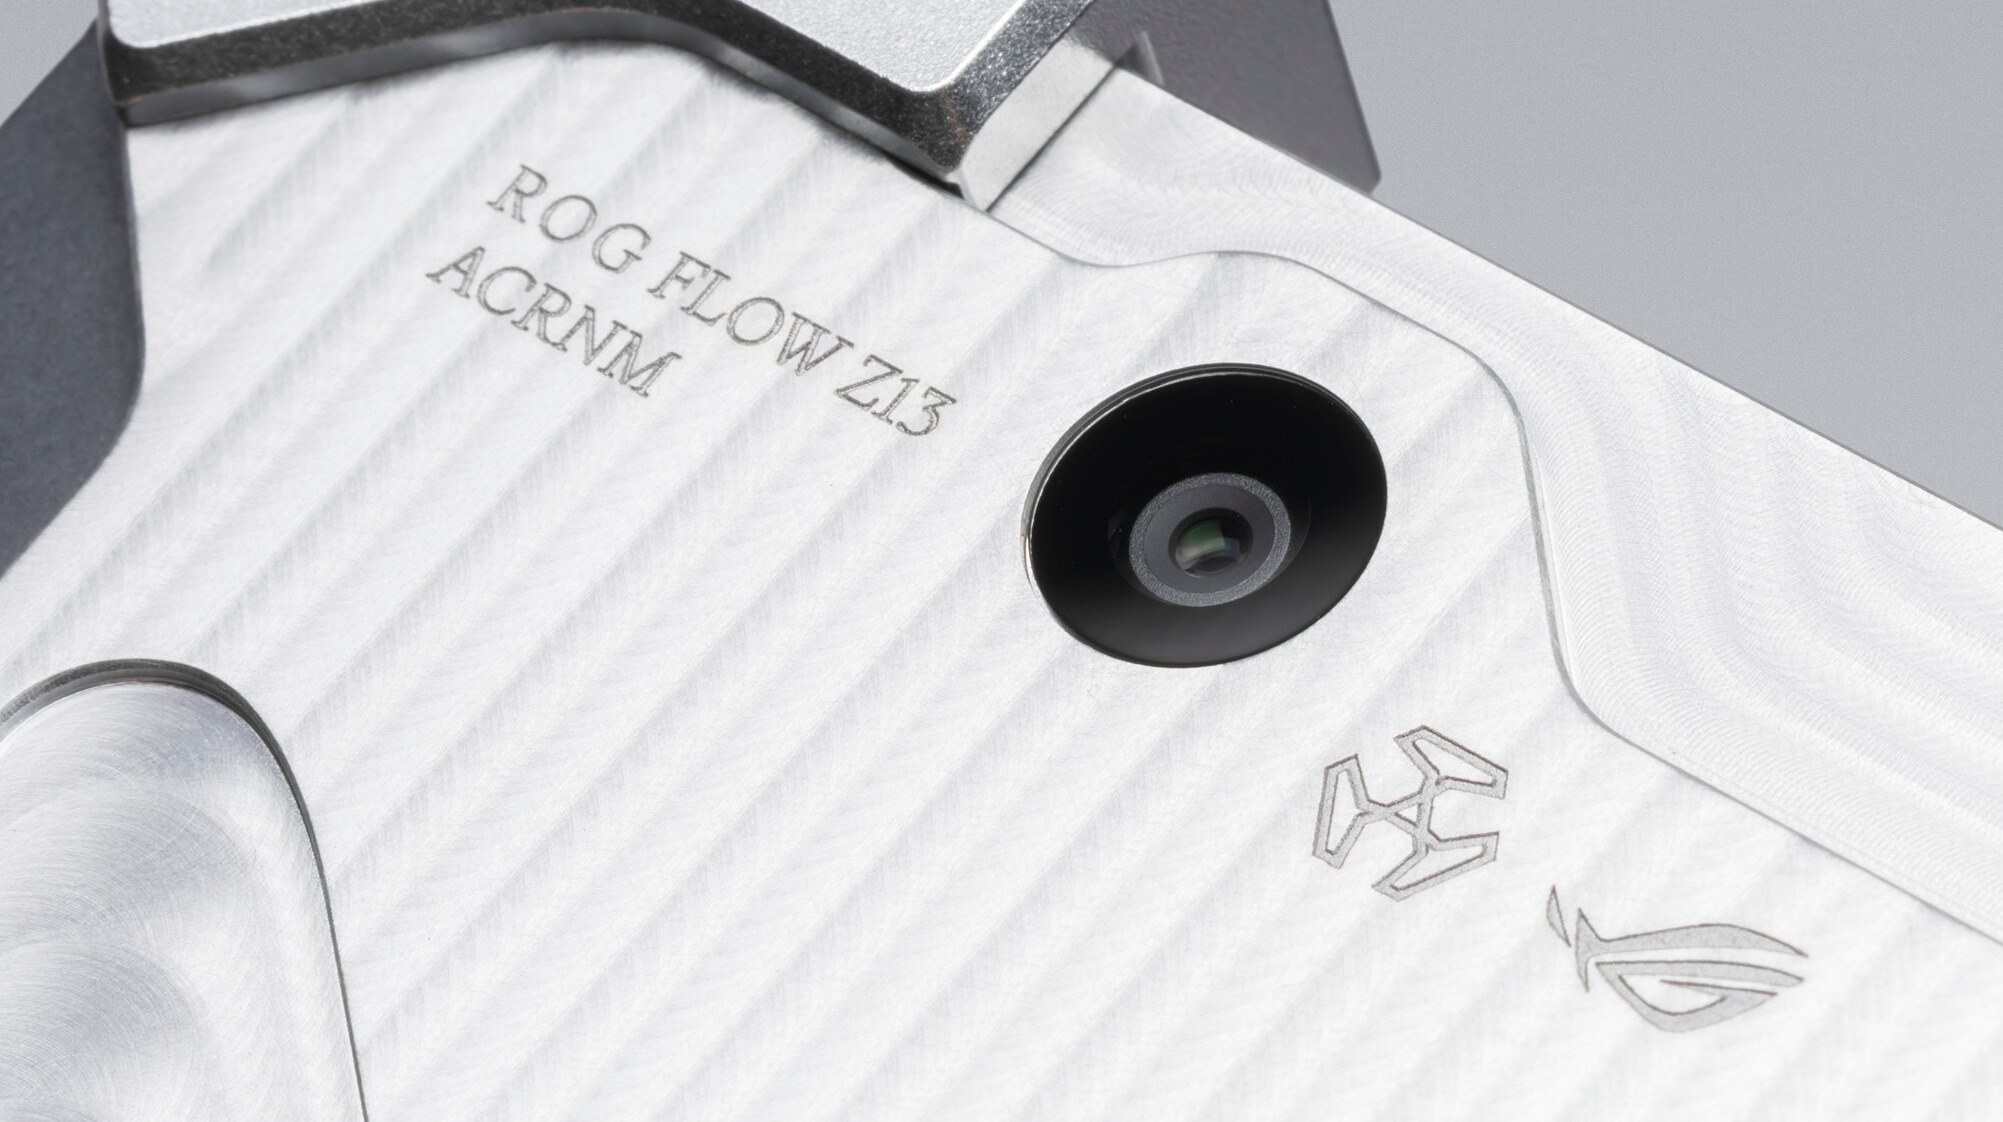 Close up of RMT02 and its rear camera, with ROG and ACRONYM logos visible